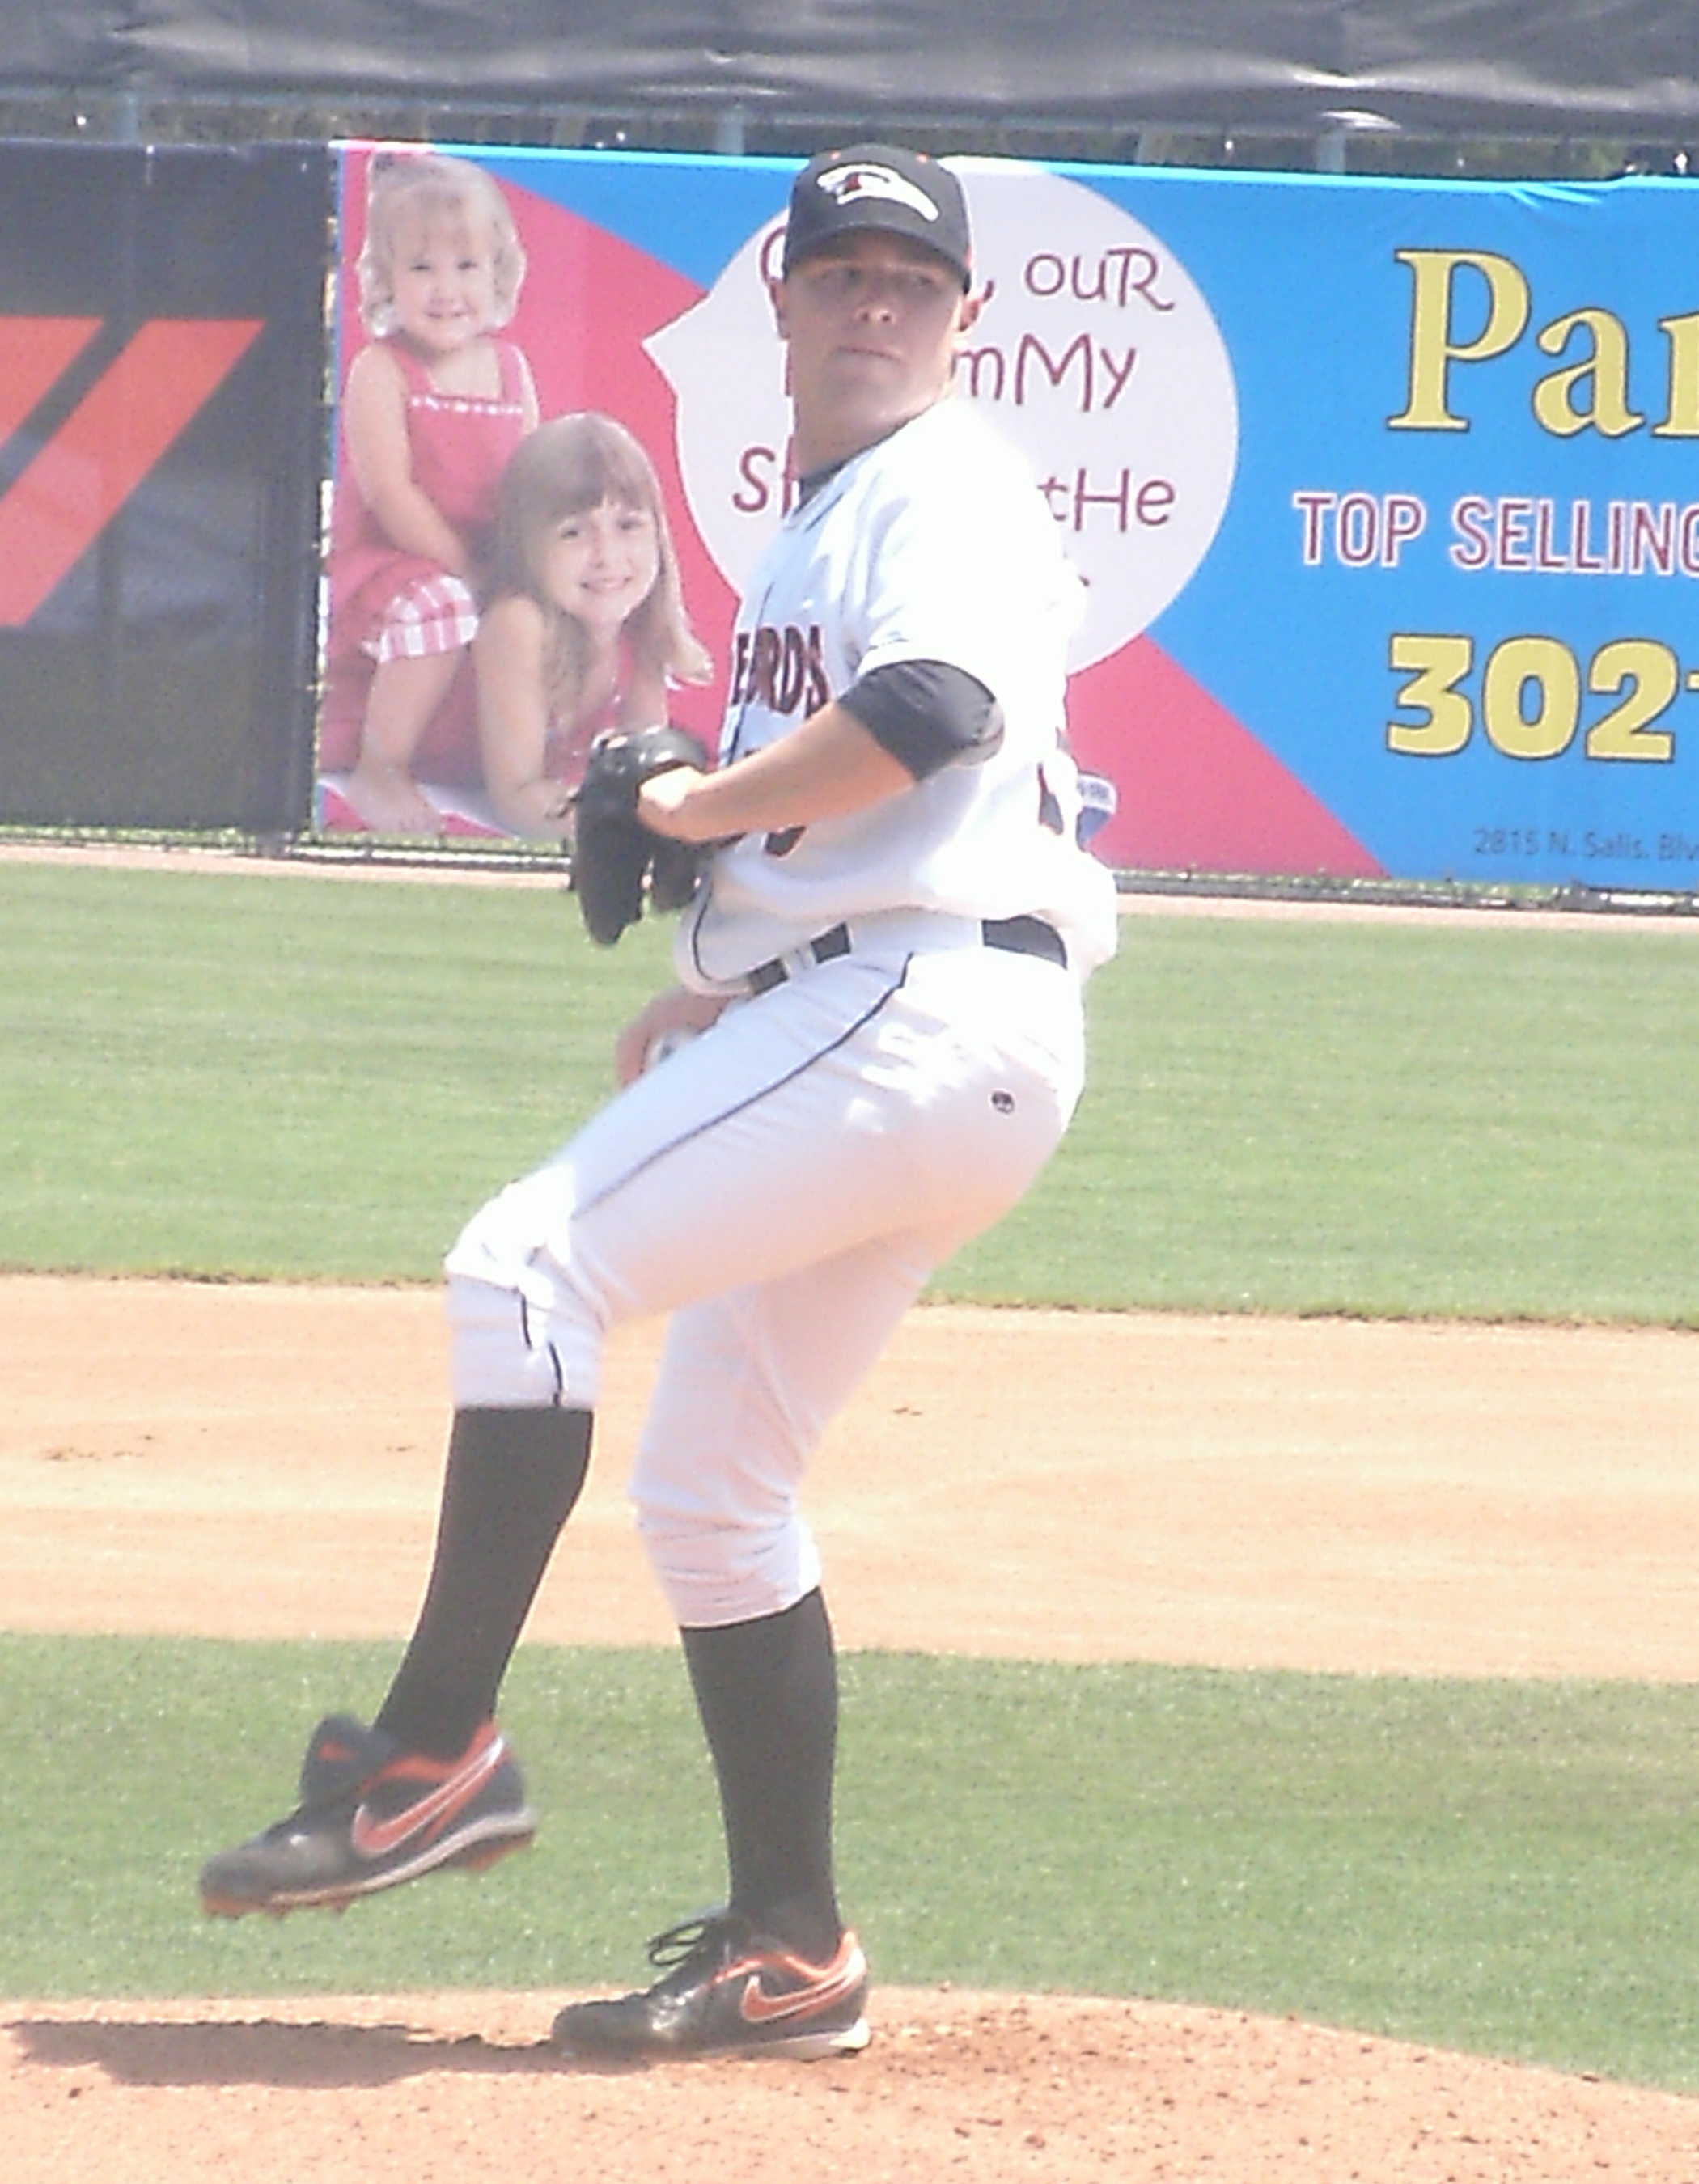 Kenny Moreland winds and deals during a start against Lakewood on May 31. It turned out to be his lone poor start thus far for Delmarva.